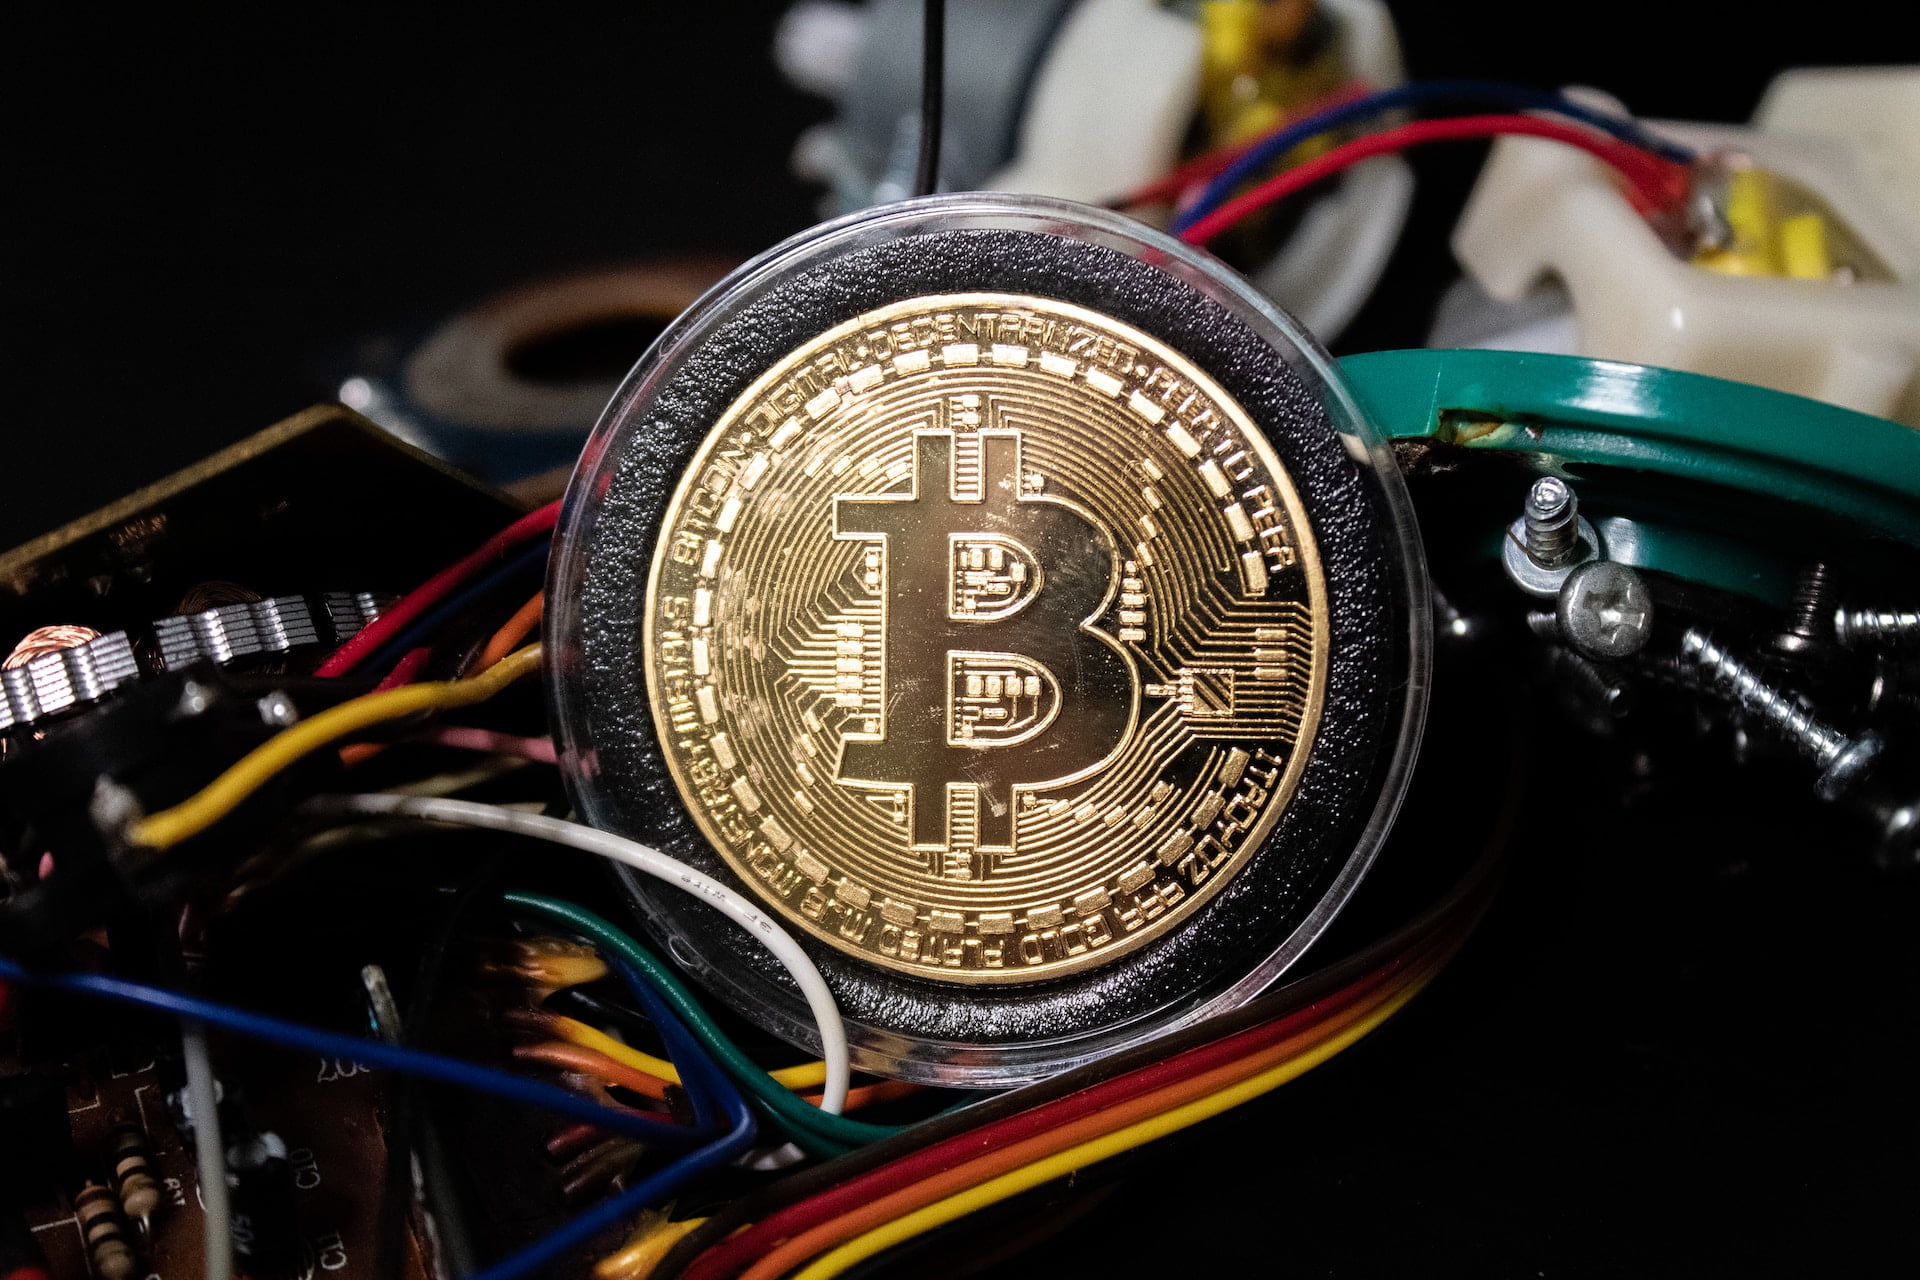 UAE emerges as a leading destination for Bitcoin mining in the middle east